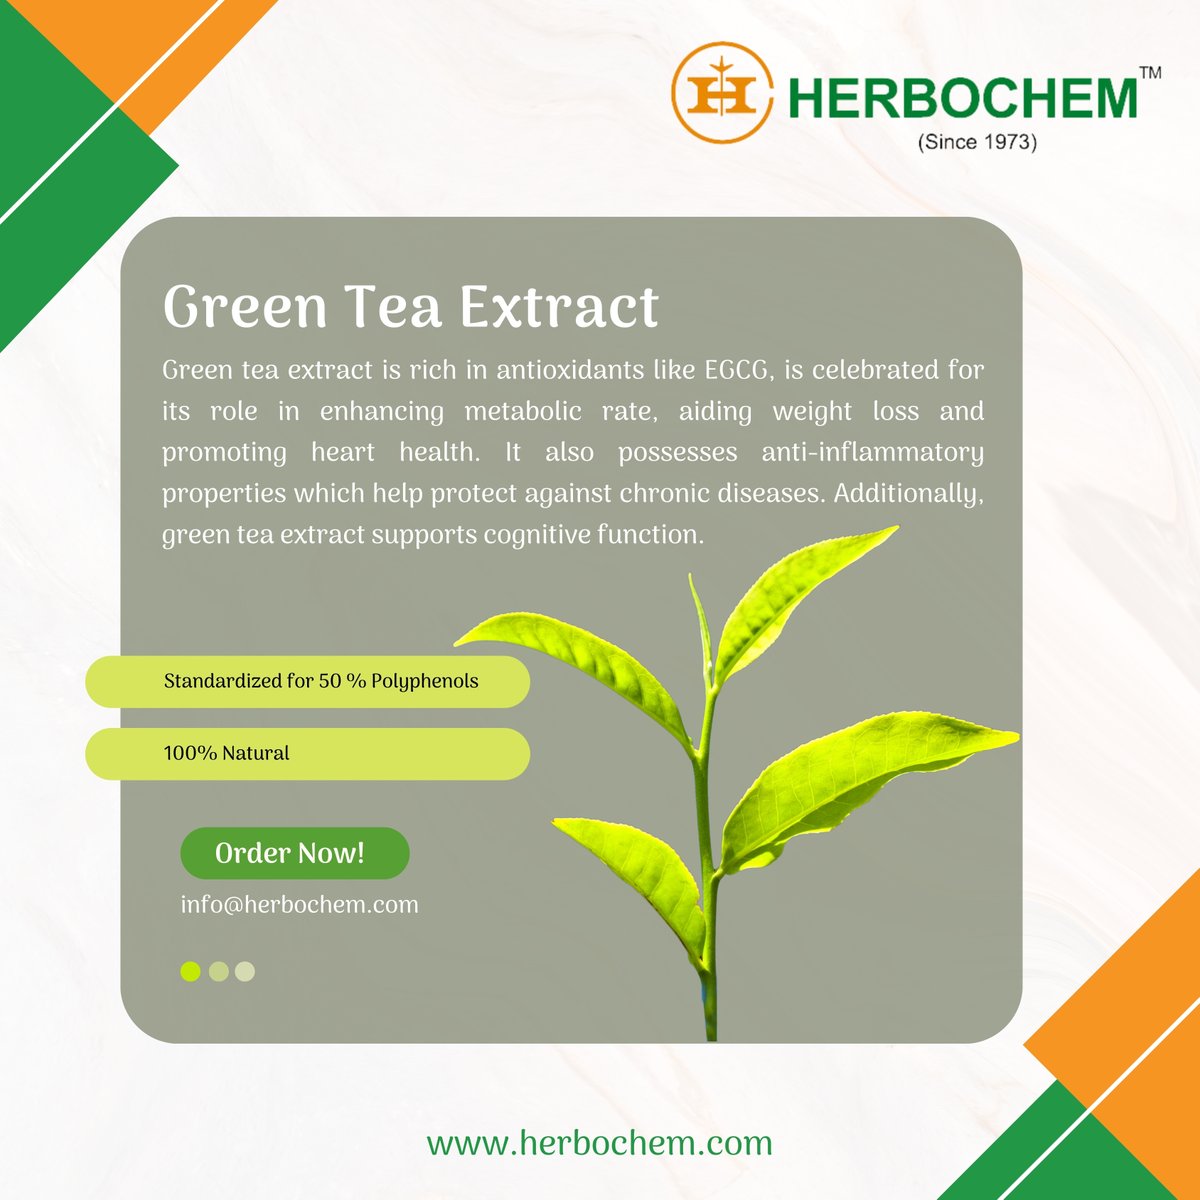 Green tea extract packs a punch with its antioxidants, helping fight free radicals and aiding weight loss. Contact us for natural green tea extract at info@herbochem.com

#herbochem #greentea #extract #herbalextracts #powders